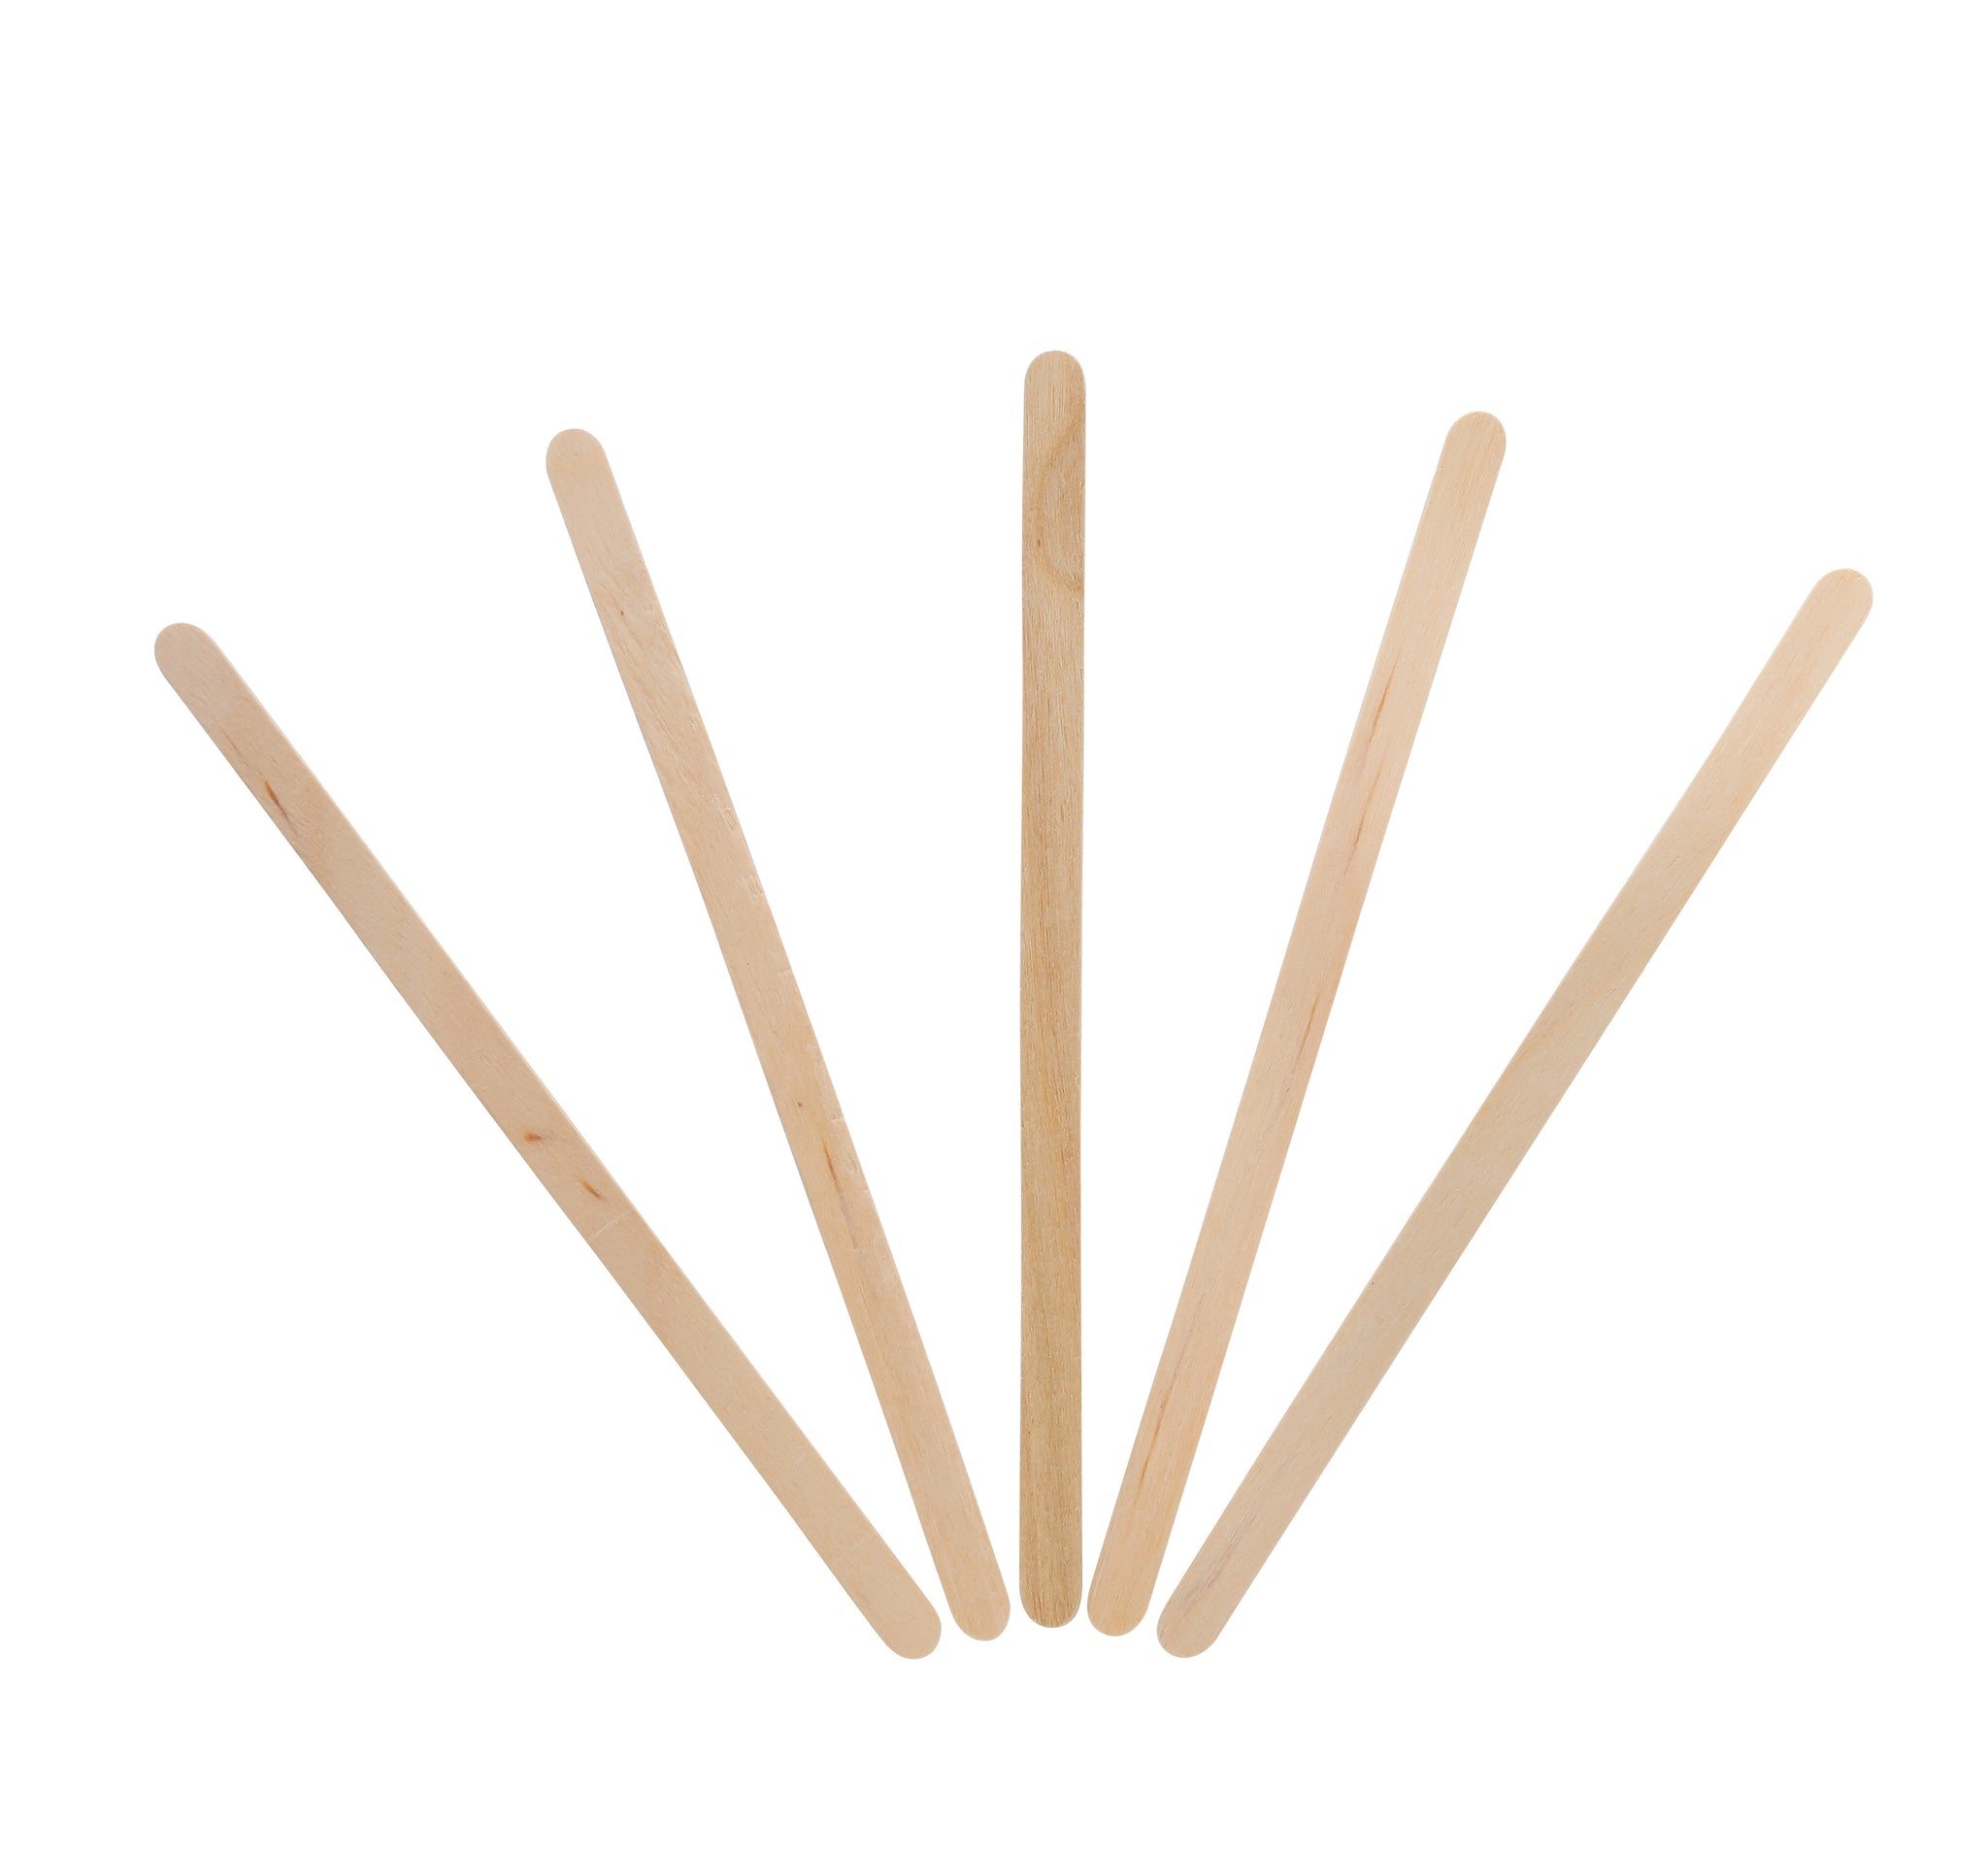 1000 Count Wooden Coffee Stir Sticks, Bulk Wood Stirrers for Coffee and Tea, Disposable Drink Stirrers for Hot Drinks, 5.5 inch Wooden Coffee